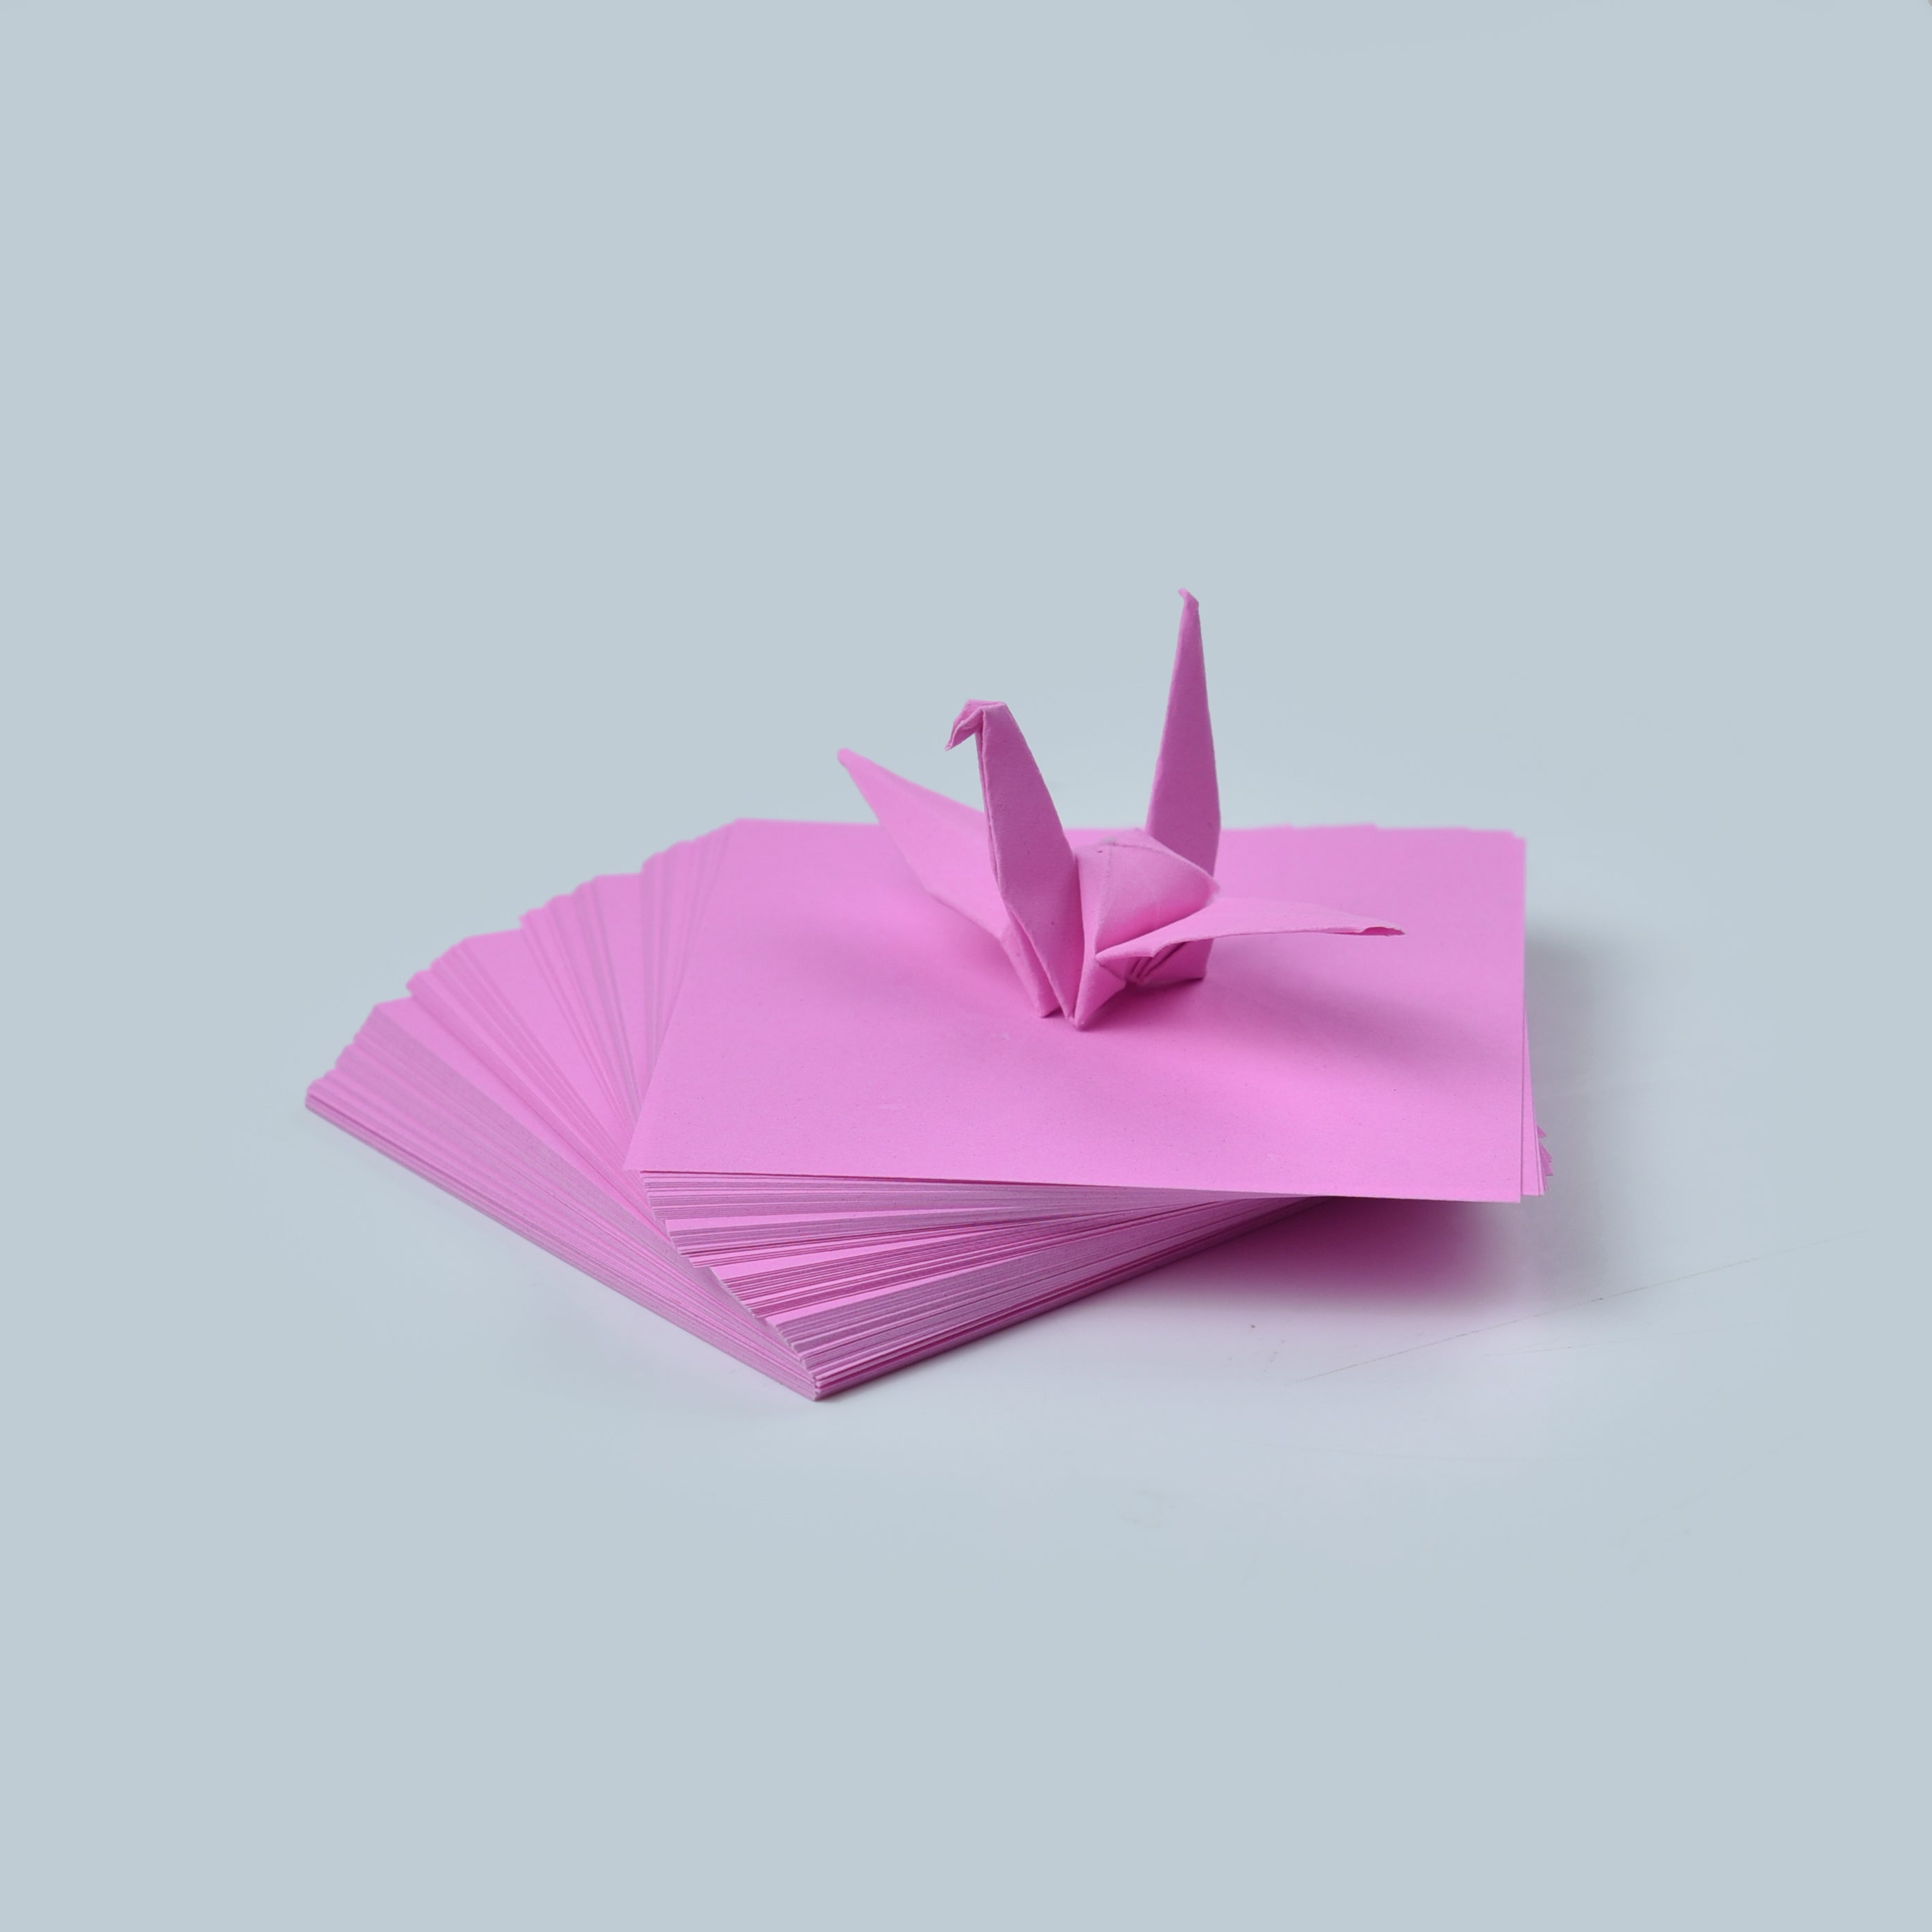 100 Origami Paper Sheets 3x3 inches Square Paper Pack for Folding, Origami Cranes, and Decoration - S13